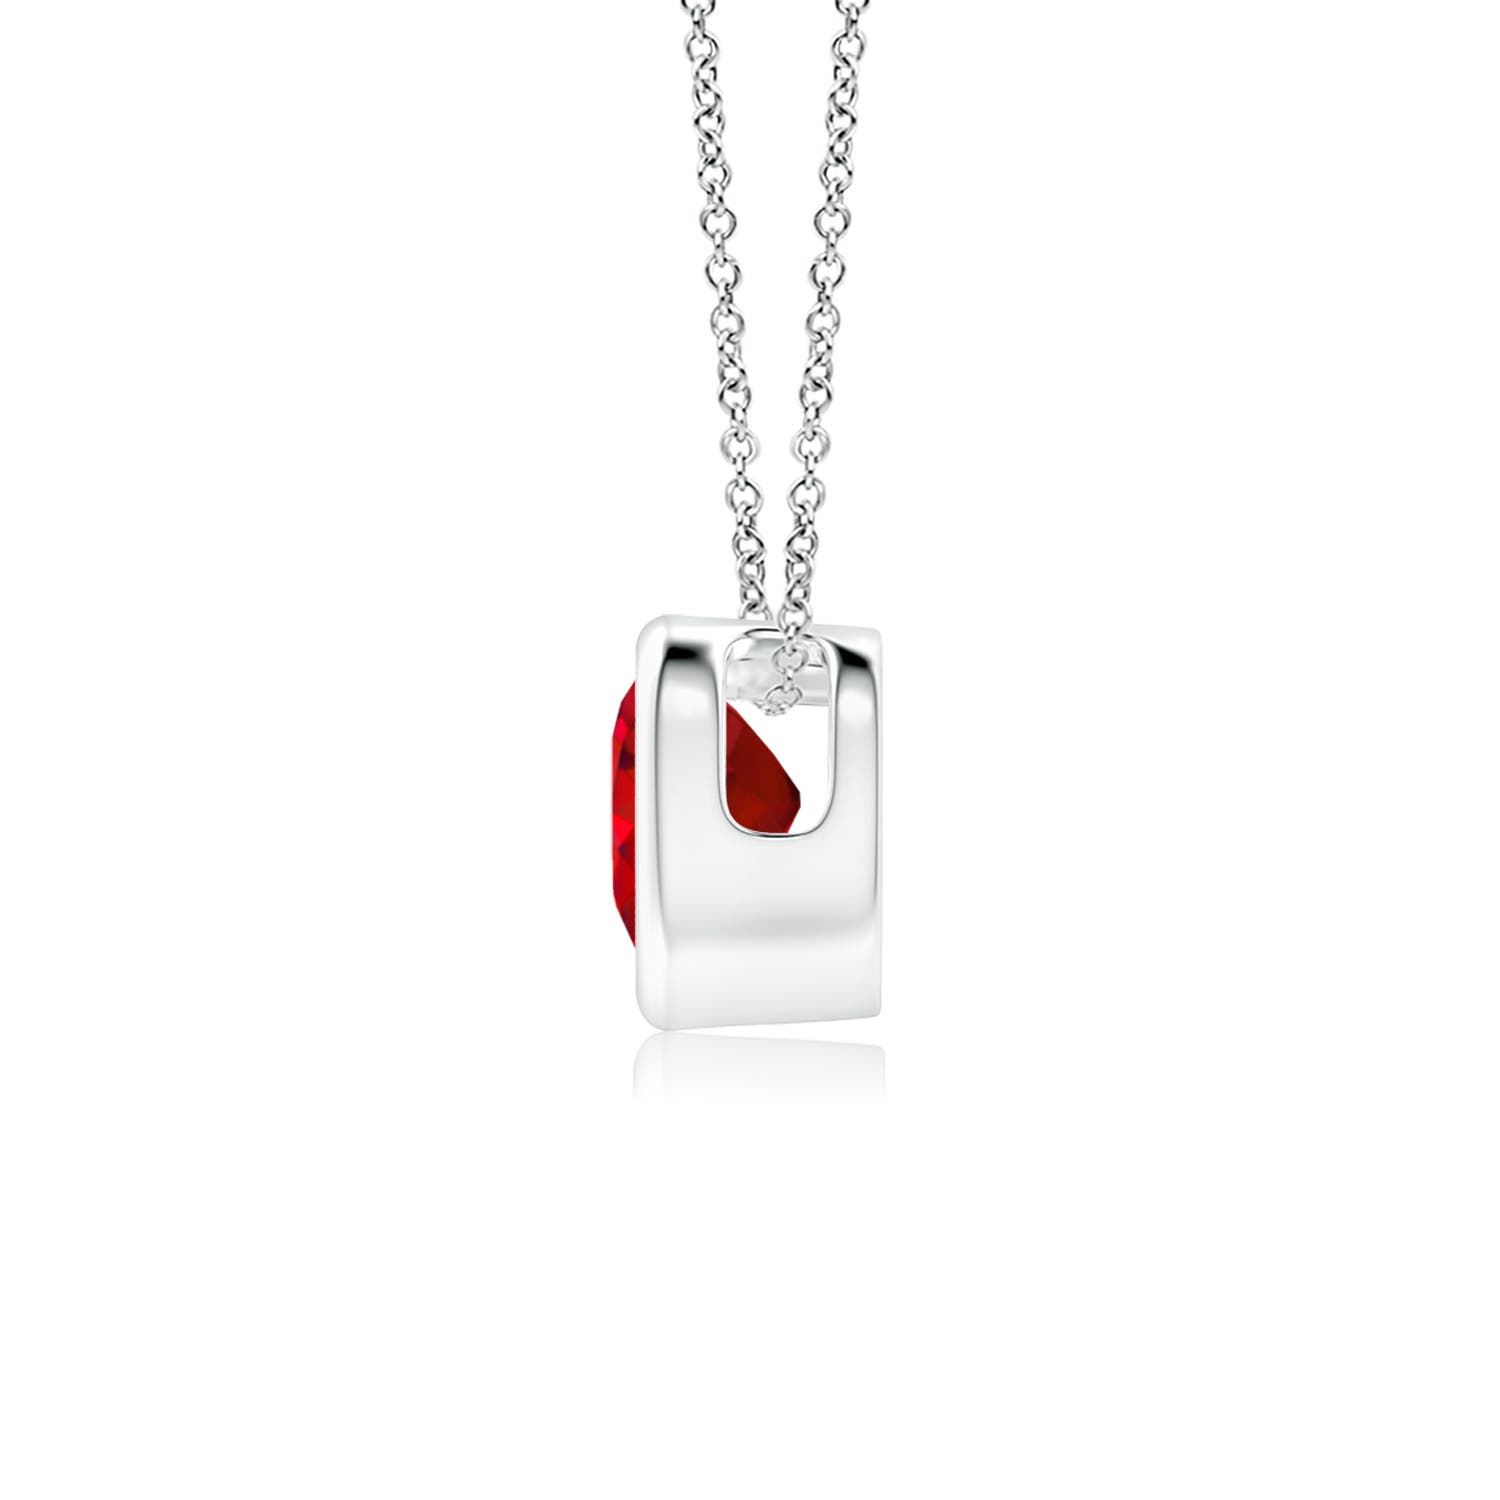 AAA - Ruby / 0.3 CT / 14 KT White Gold